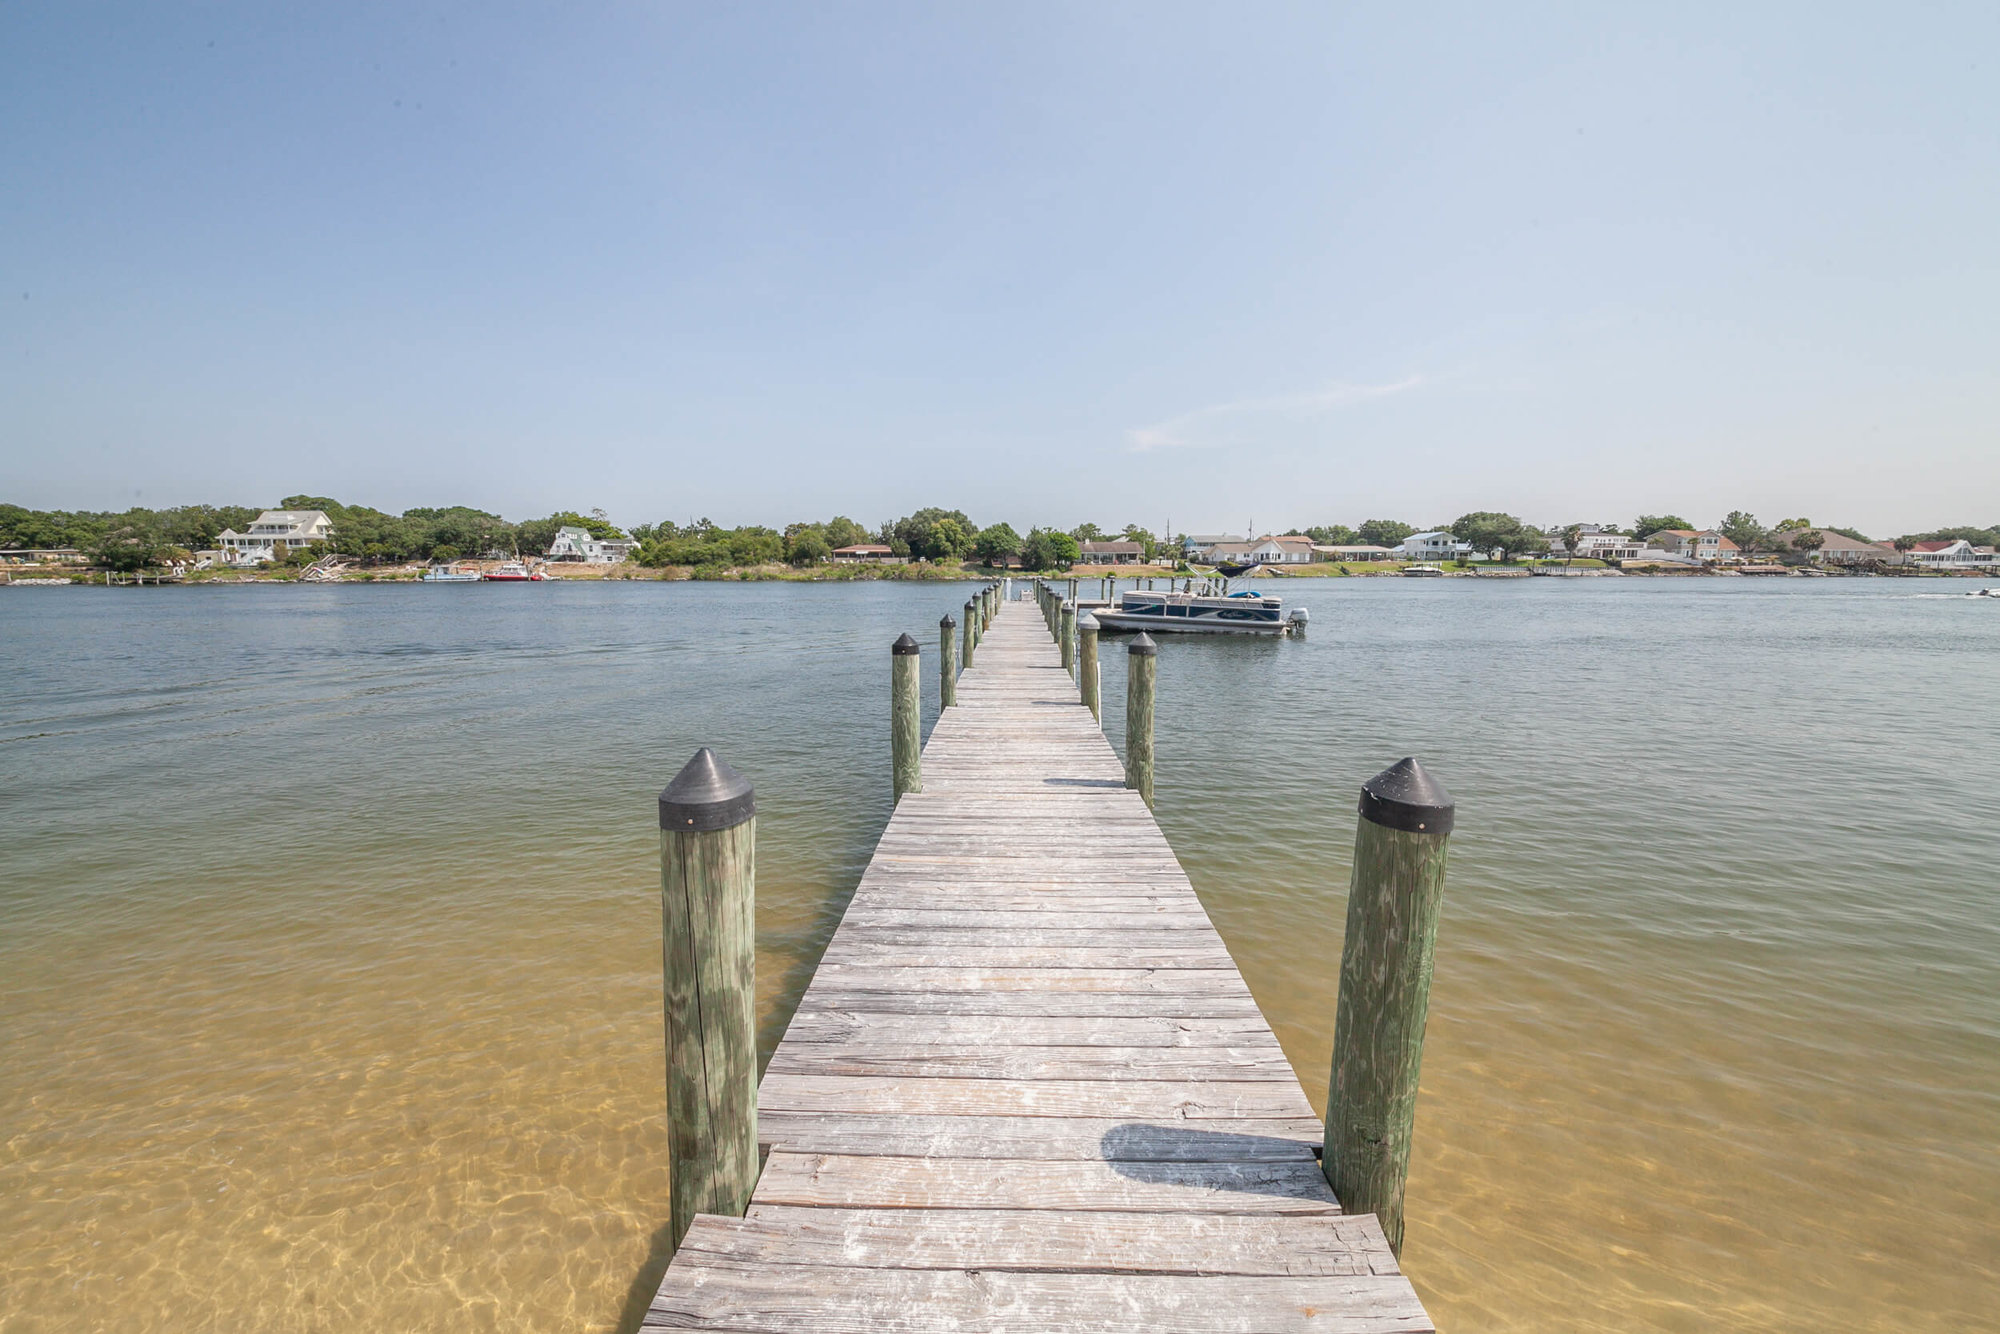 Tie your boat up to the pier at Sailmaker's Place in Perdido Key